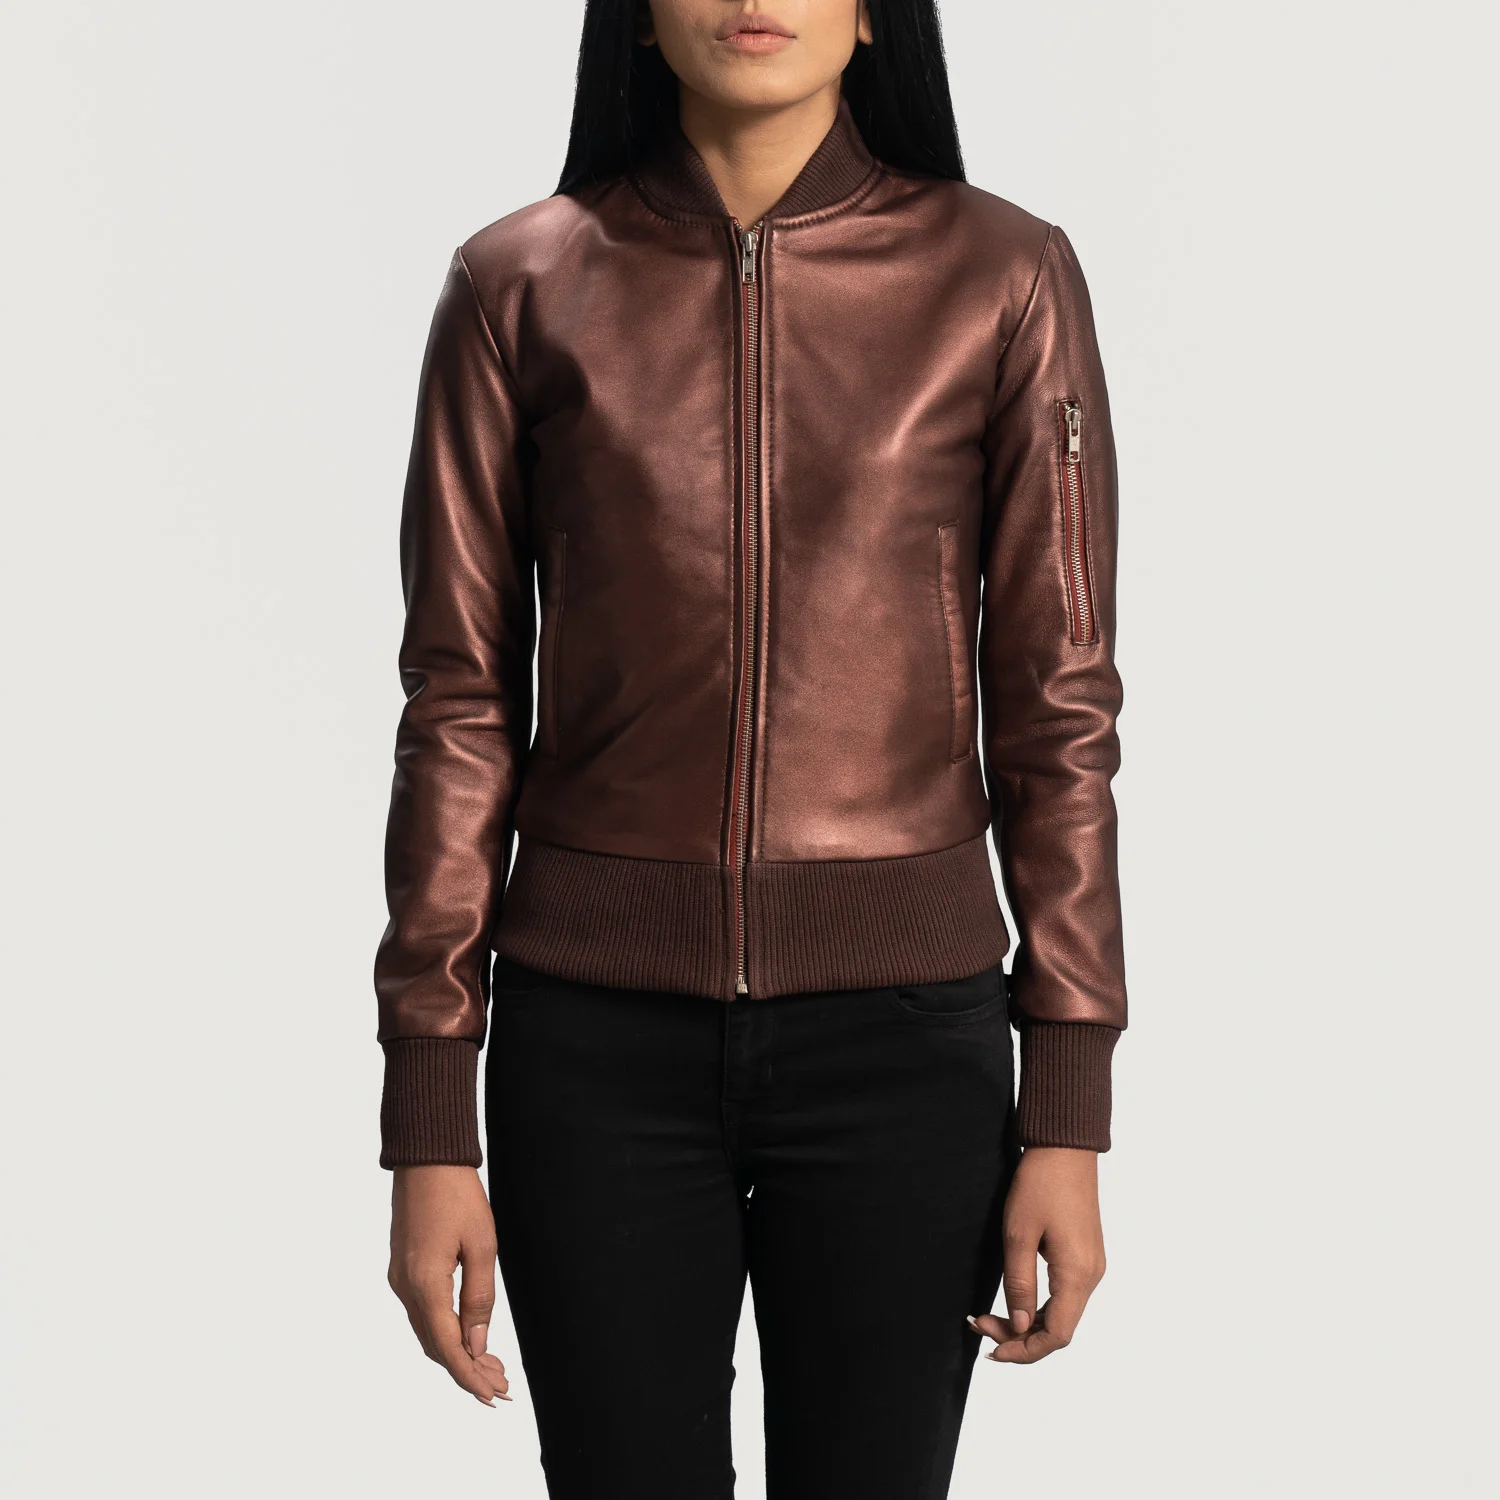 The Legendary G1 Leather Jacket (You've seen this style in Top